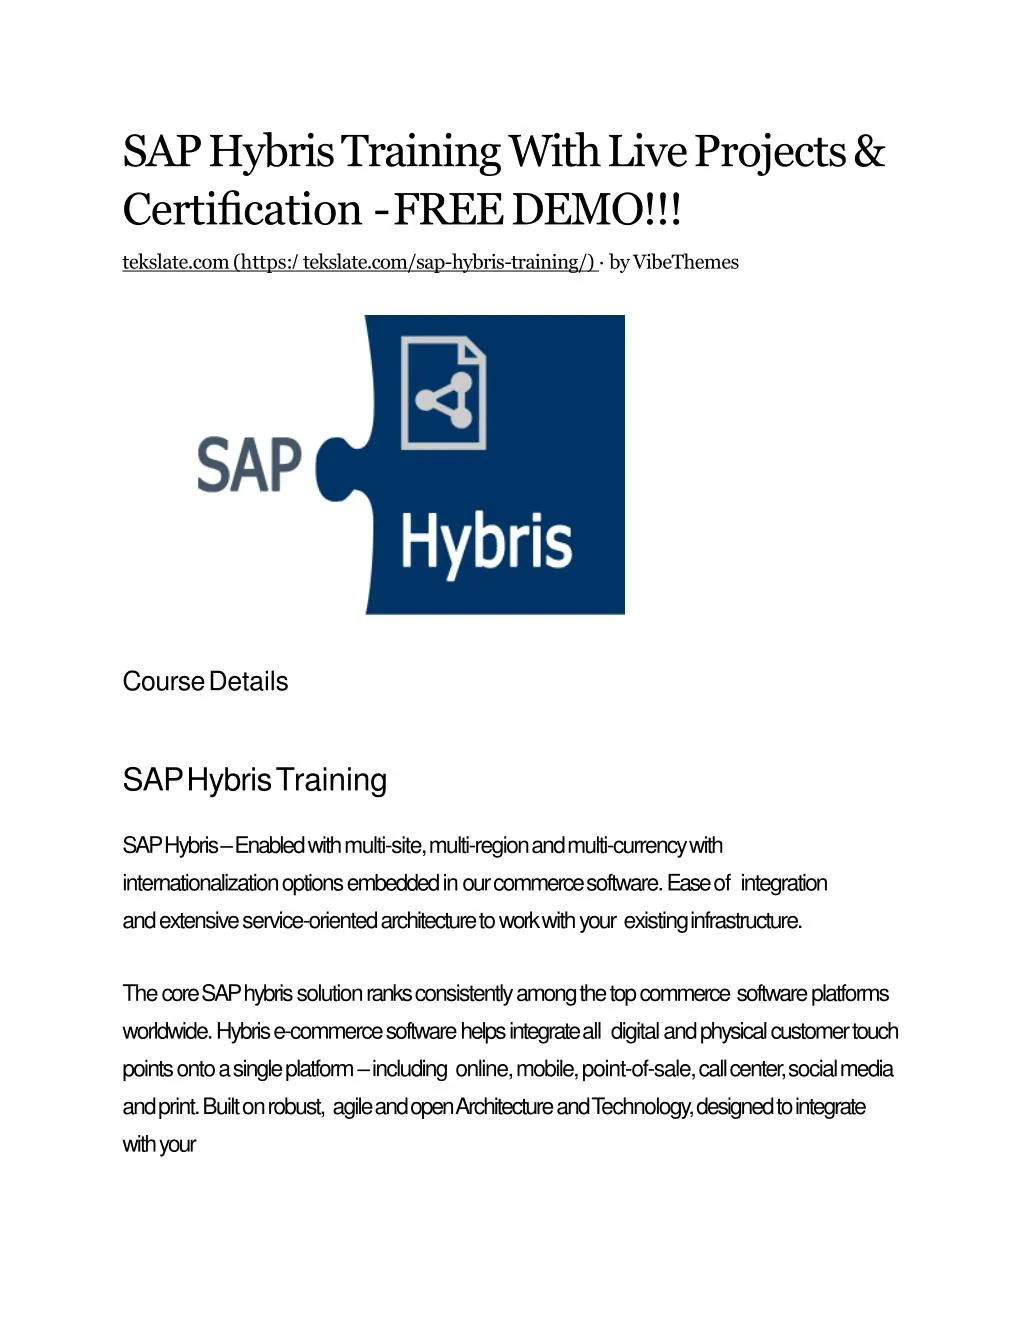 sap hybris training with live projects certi cation free demo